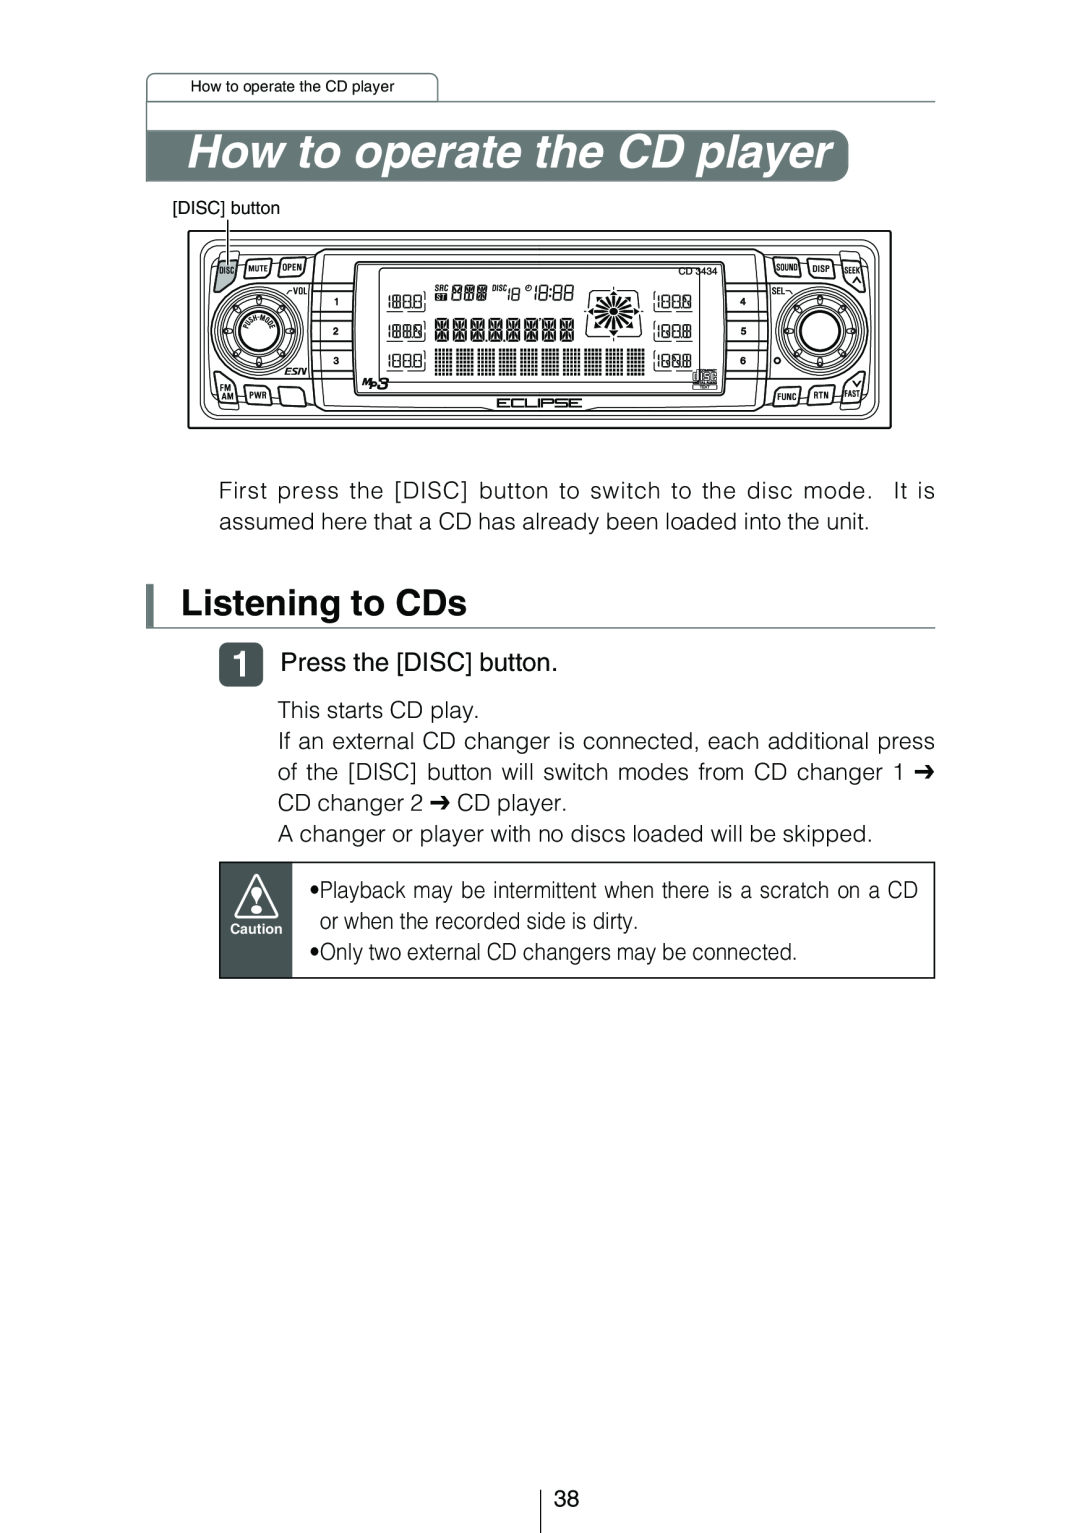 Eclipse - Fujitsu Ten CD3434 owner manual How to operate the CD player, Listening to CDs, Press the DISC button 